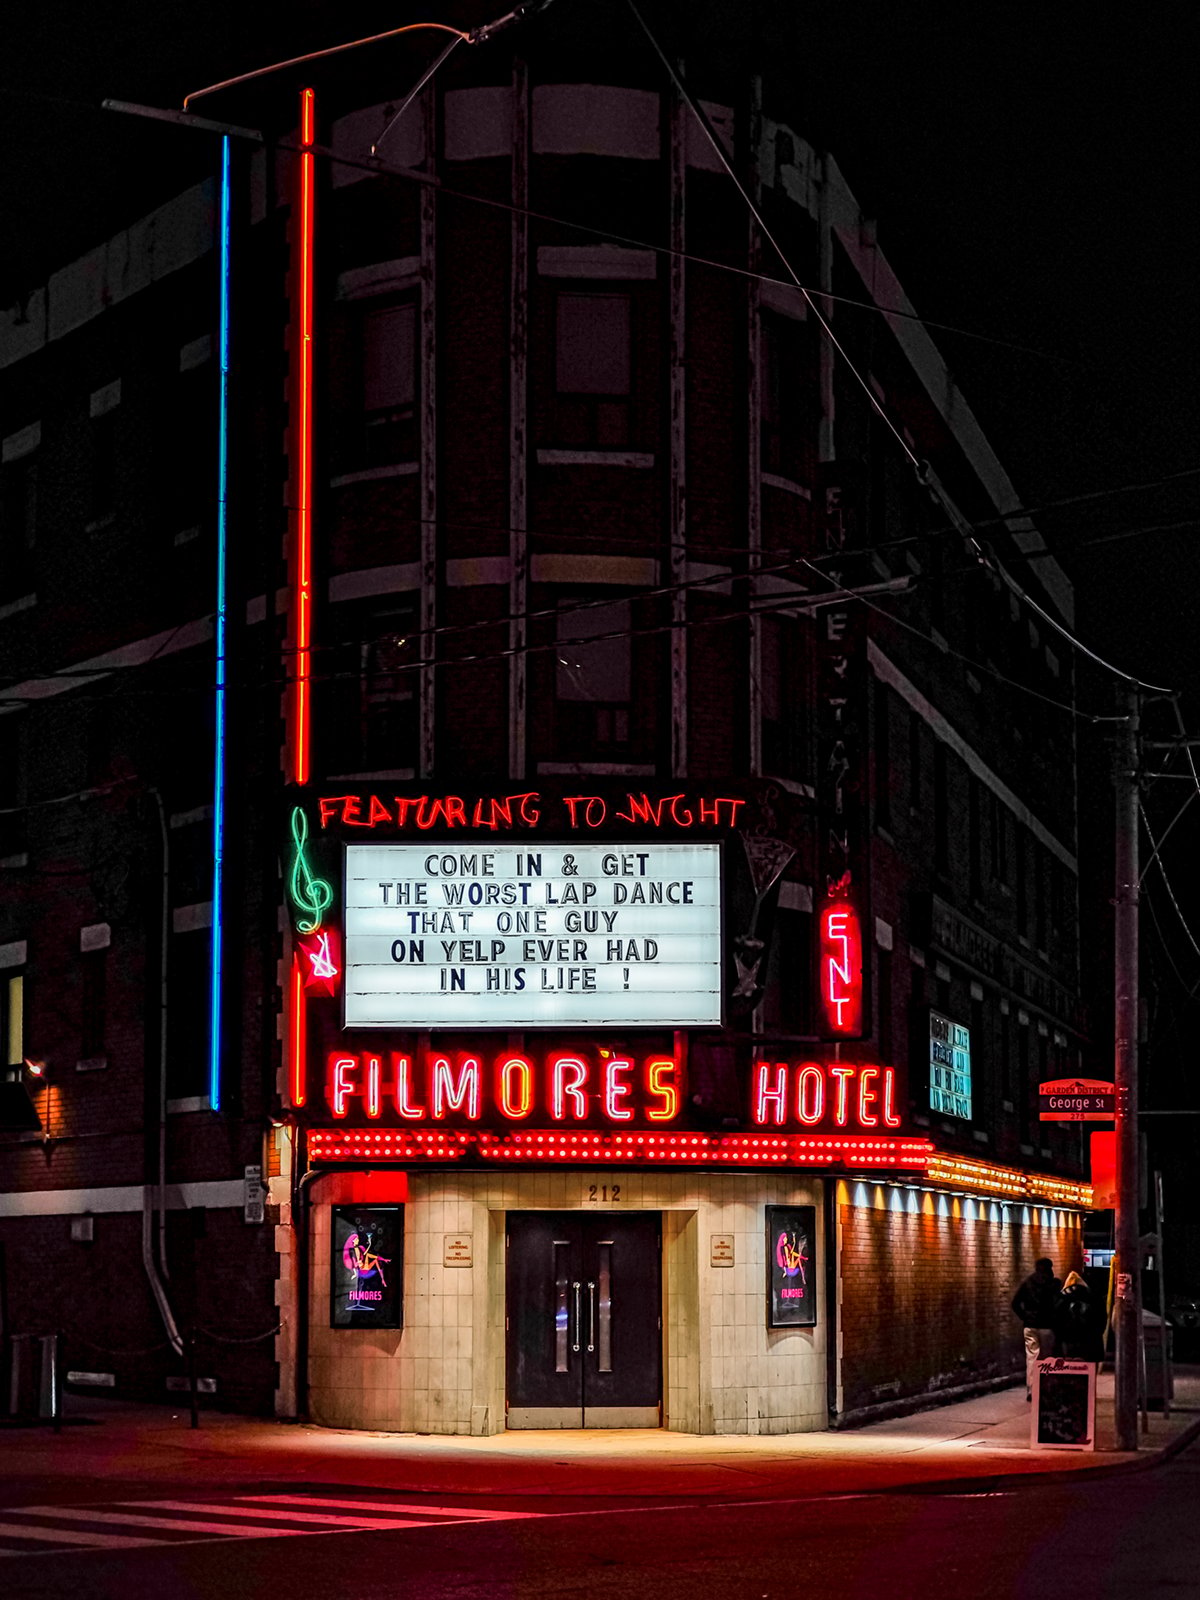 A vibrant neon sign lights up the facade of fillmores hotel at night, advertising a comedy event featuring "the worst lap dance ever" with "that one guy no one ever had on his lap.